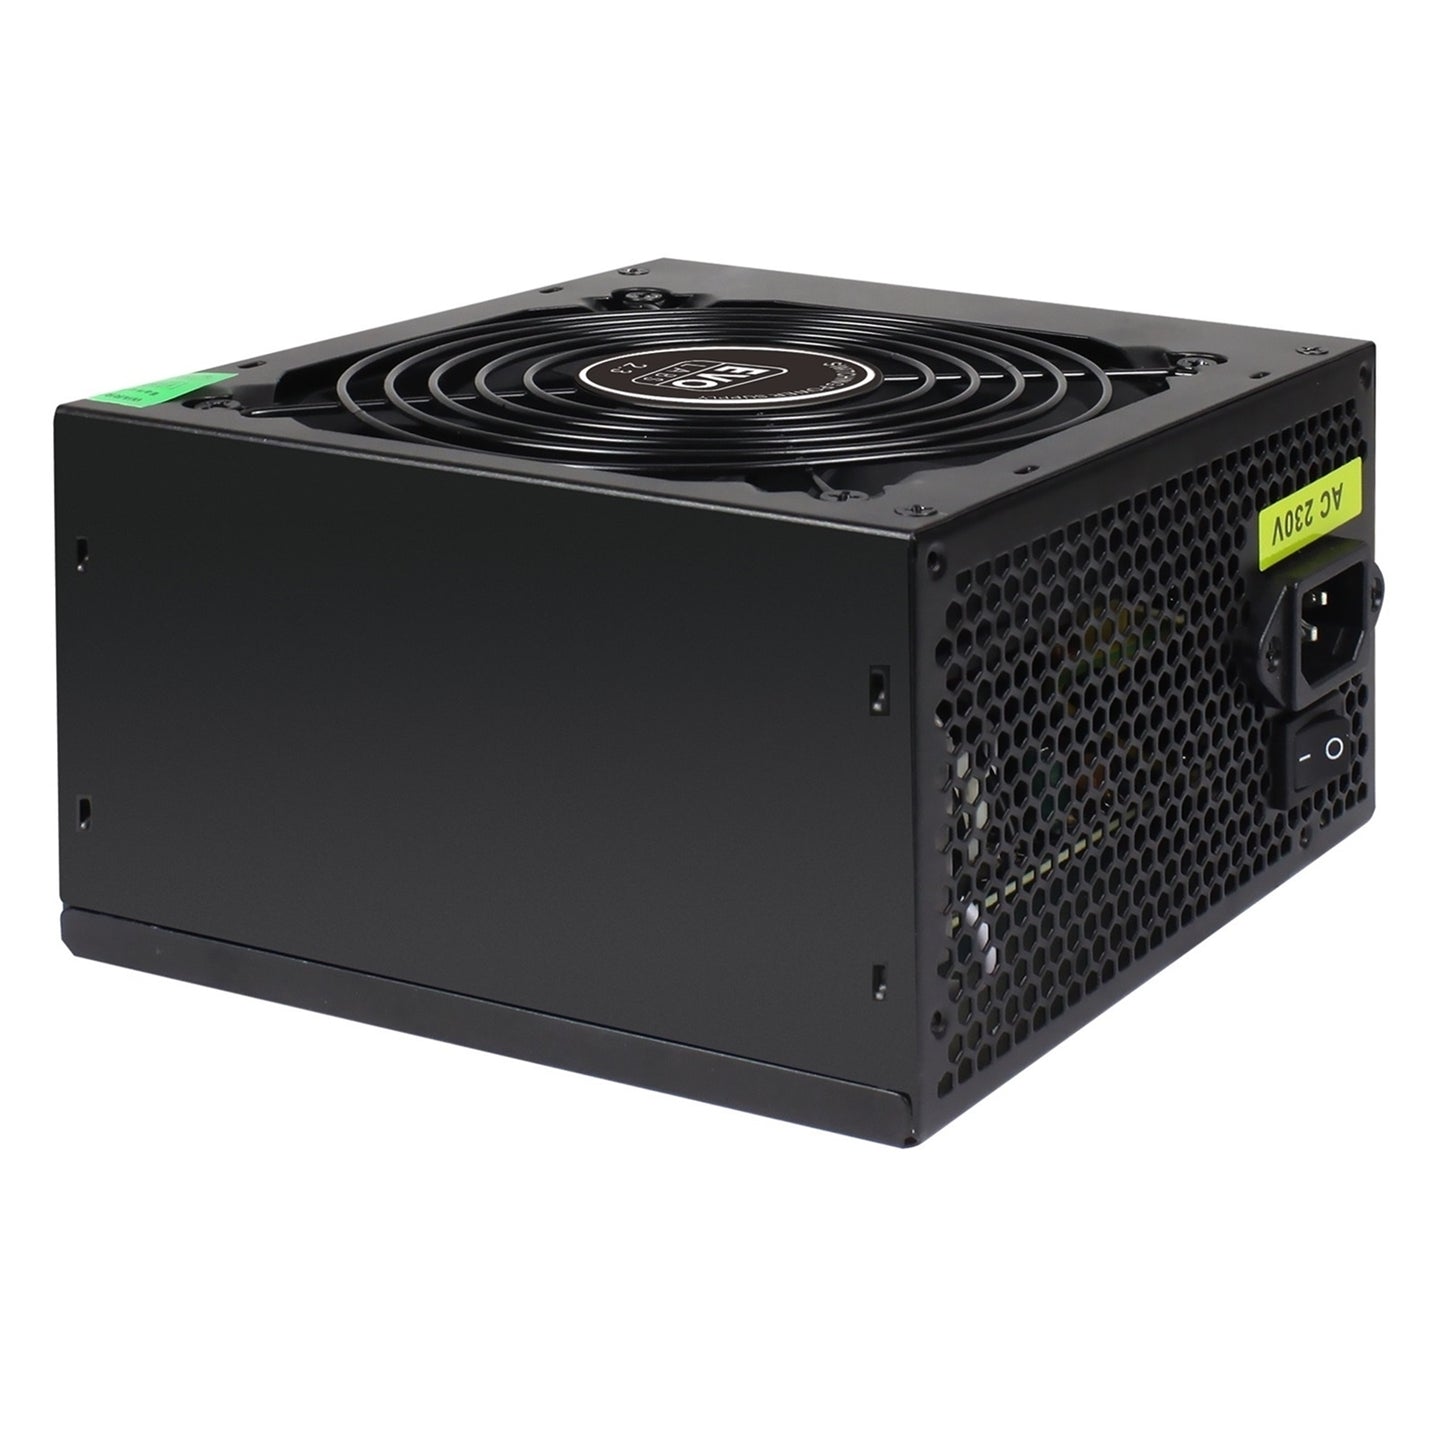 EVO LABS BR600-12BL 600W PSU, 120mm Black Silent Fan with Improved Ventilation, Non Modular, Stable & Reliable, Retail Packaged